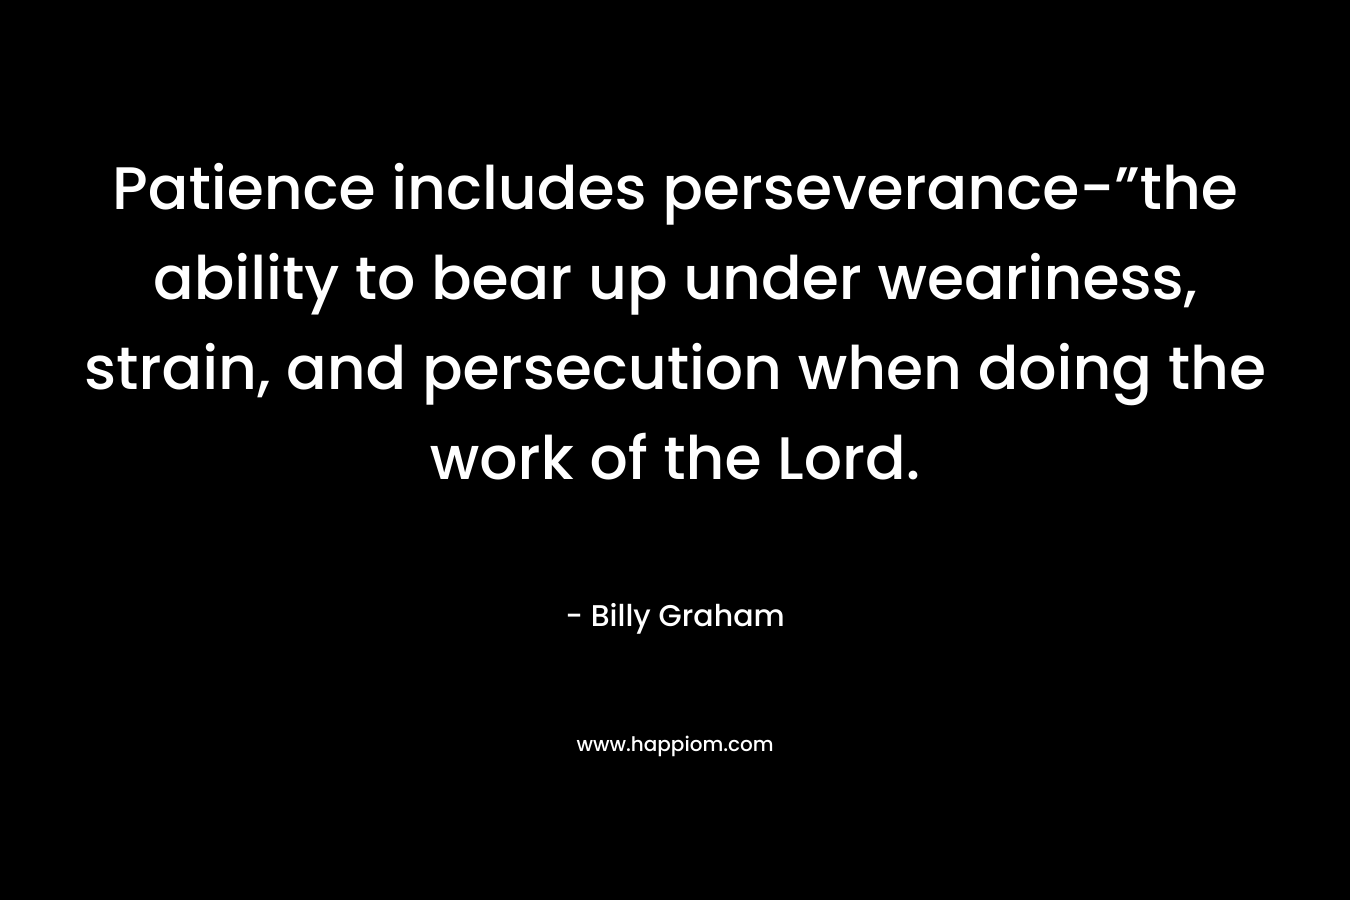 Patience includes perseverance-”the ability to bear up under weariness, strain, and persecution when doing the work of the Lord. – Billy Graham